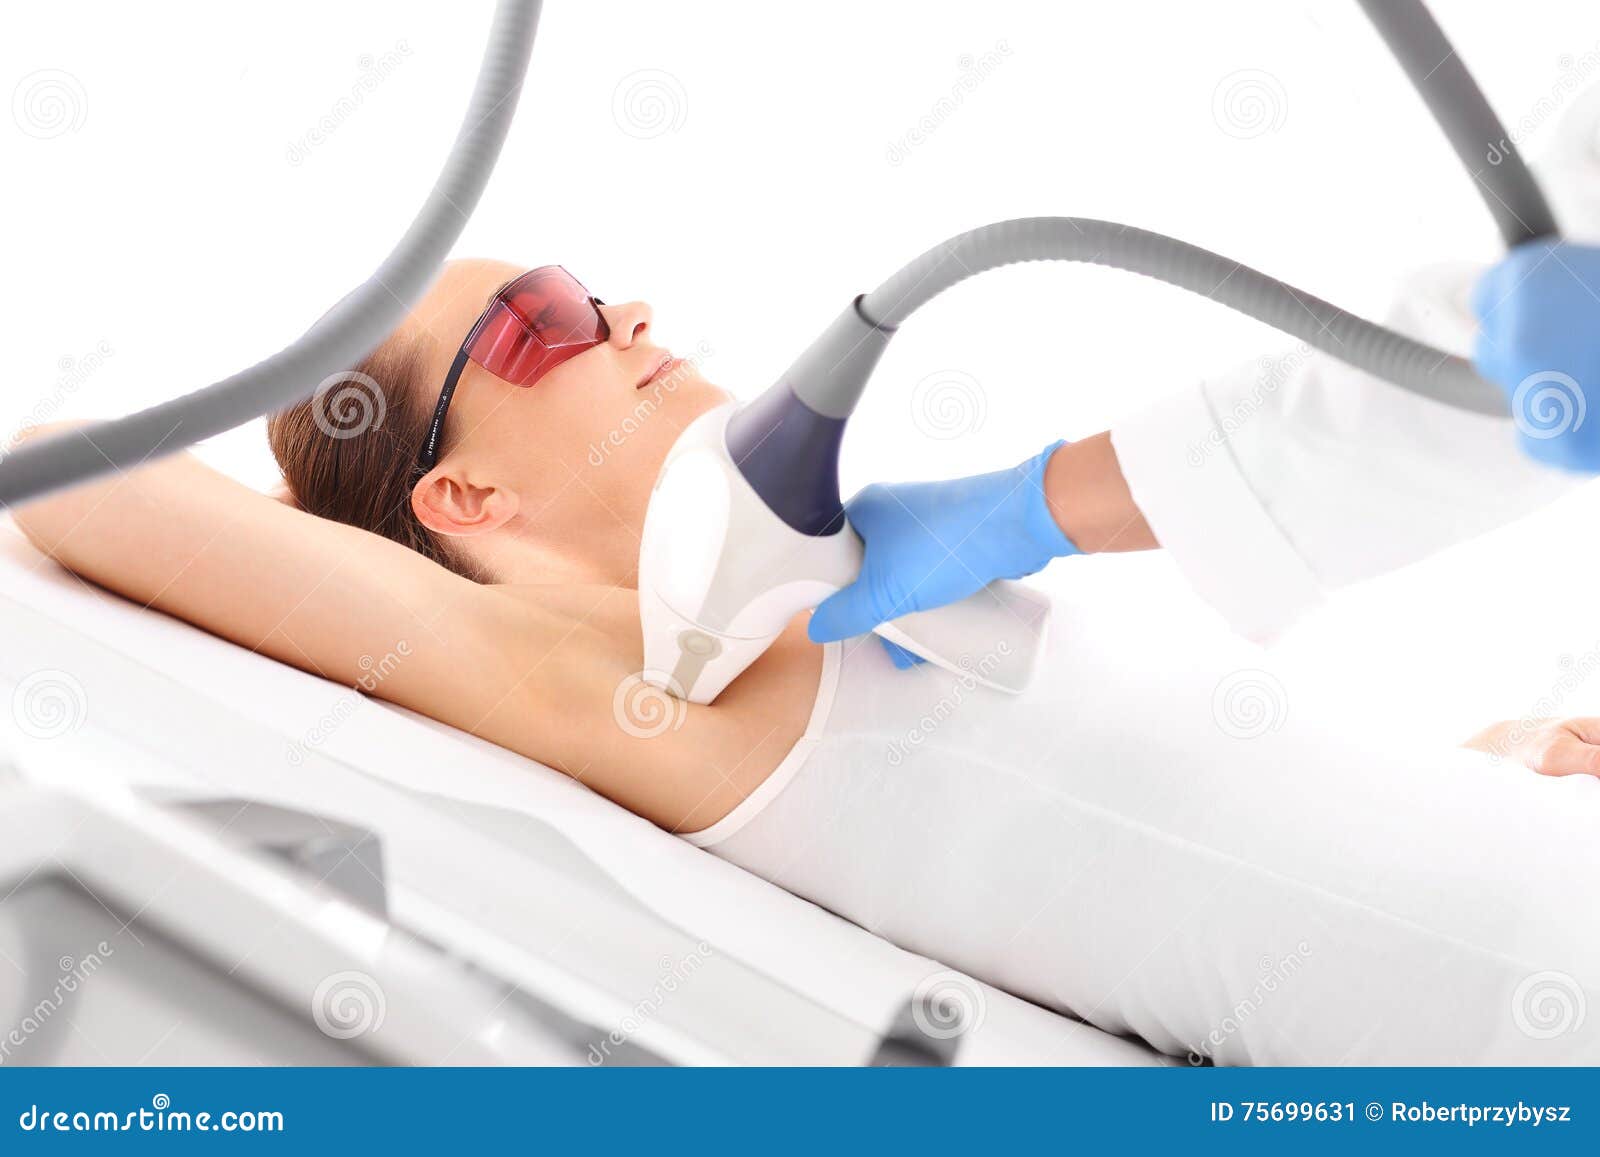 Laser Hair Removal Armpits Stock Image Image Of Dermatologist